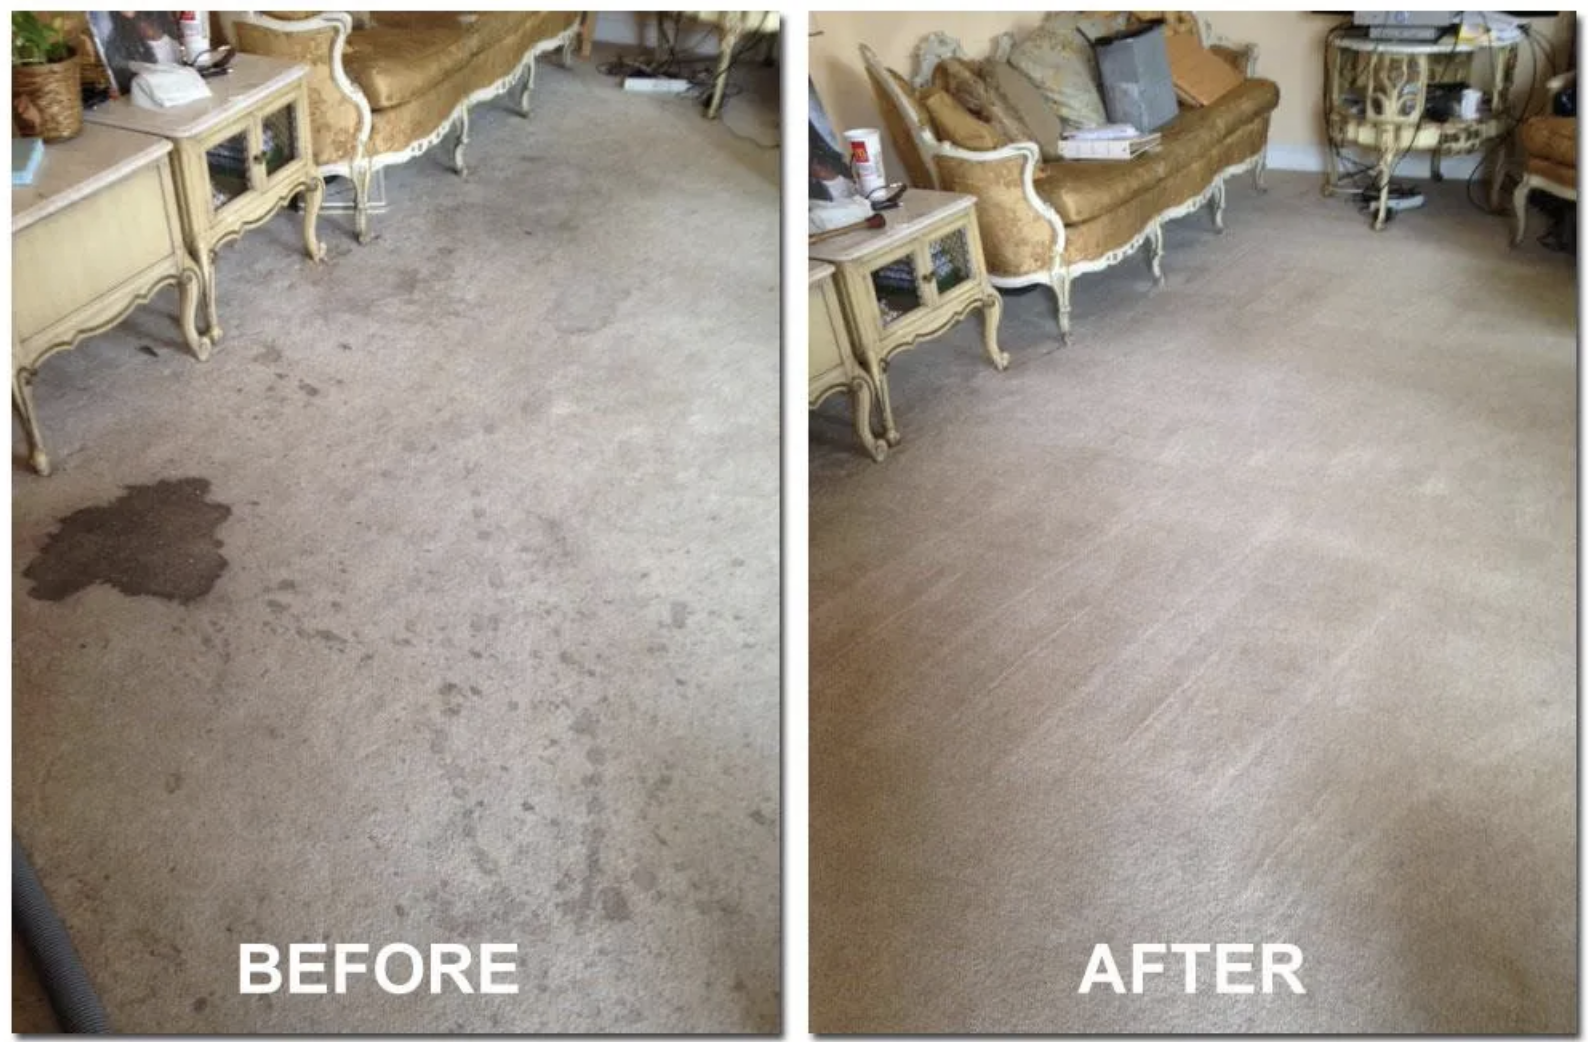 Before and after Chem-Dry carpet cleaning in VA Beach